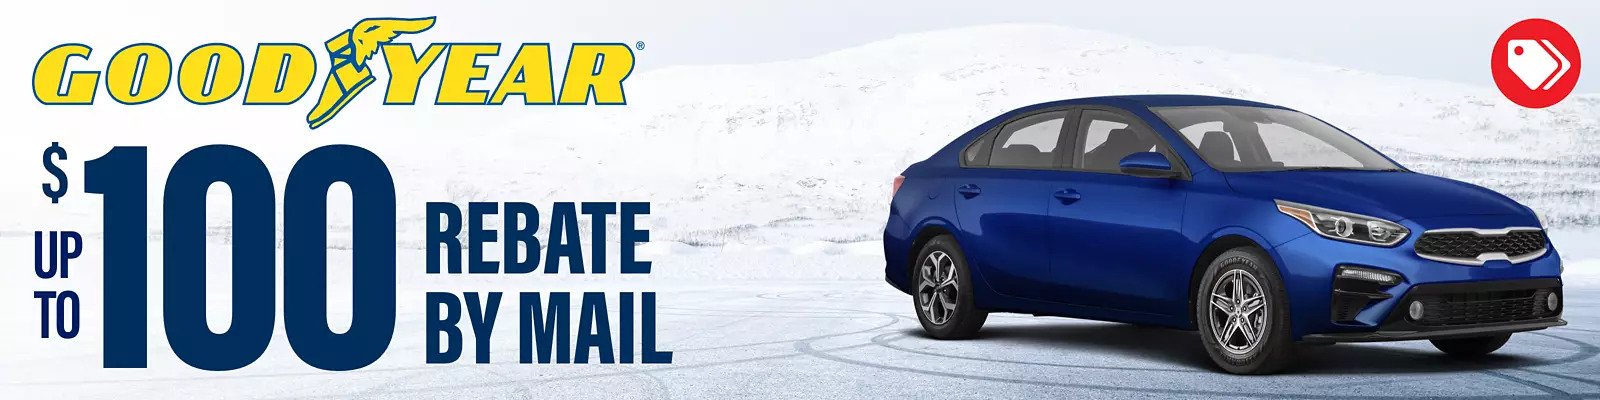 Goodyear tire rebate for November 2021 with Discount Tire Direct